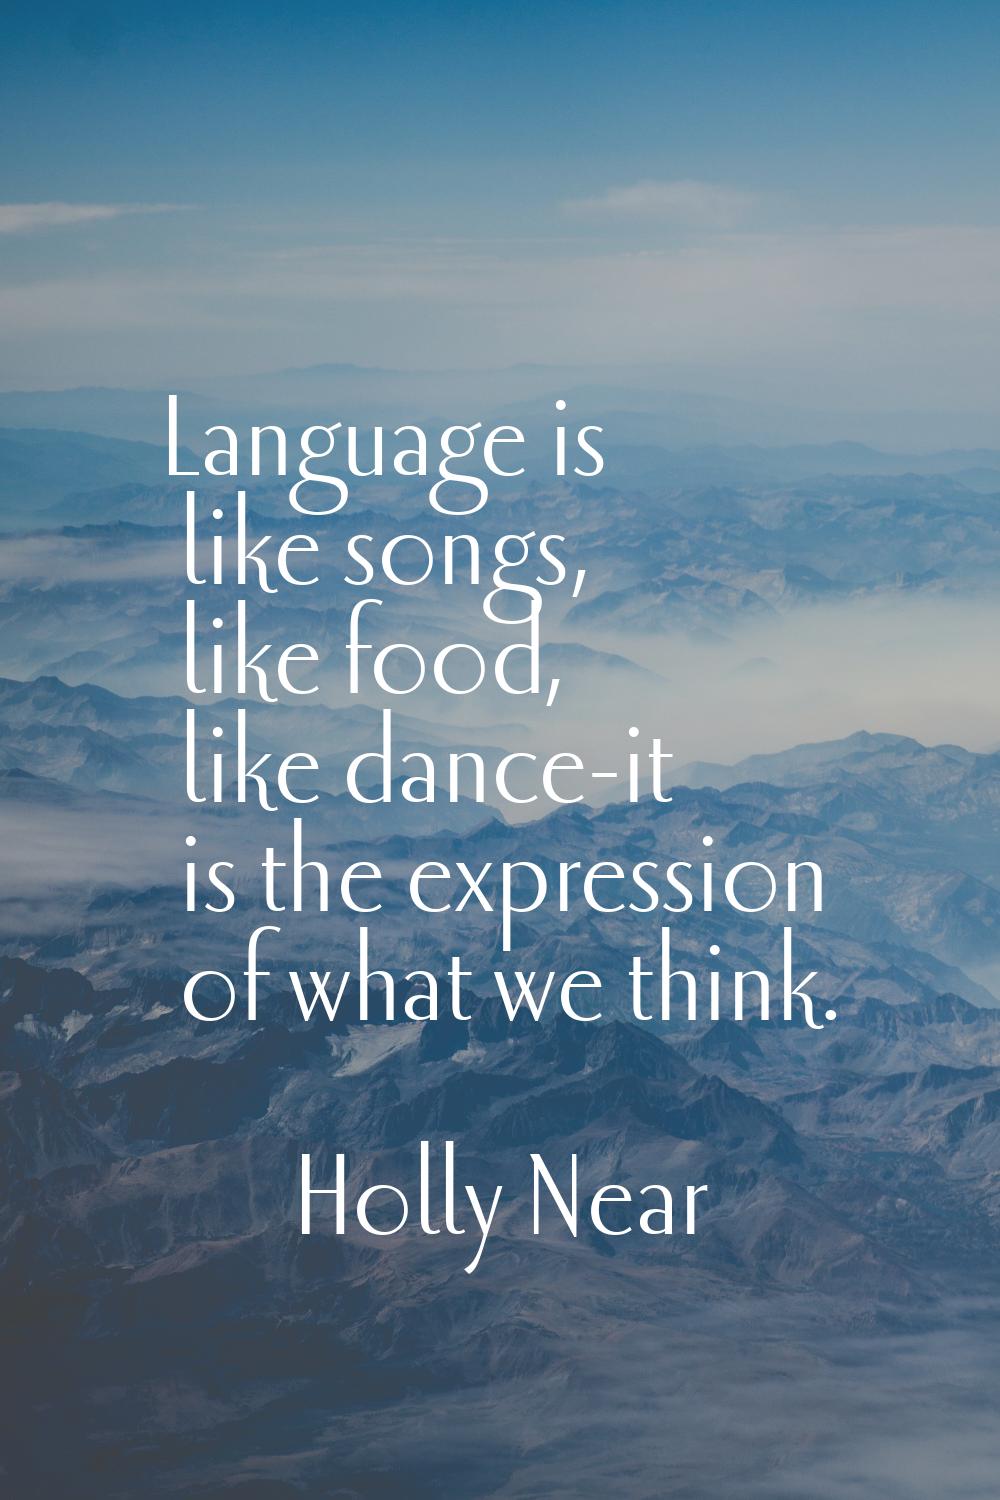 Language is like songs, like food, like dance-it is the expression of what we think.